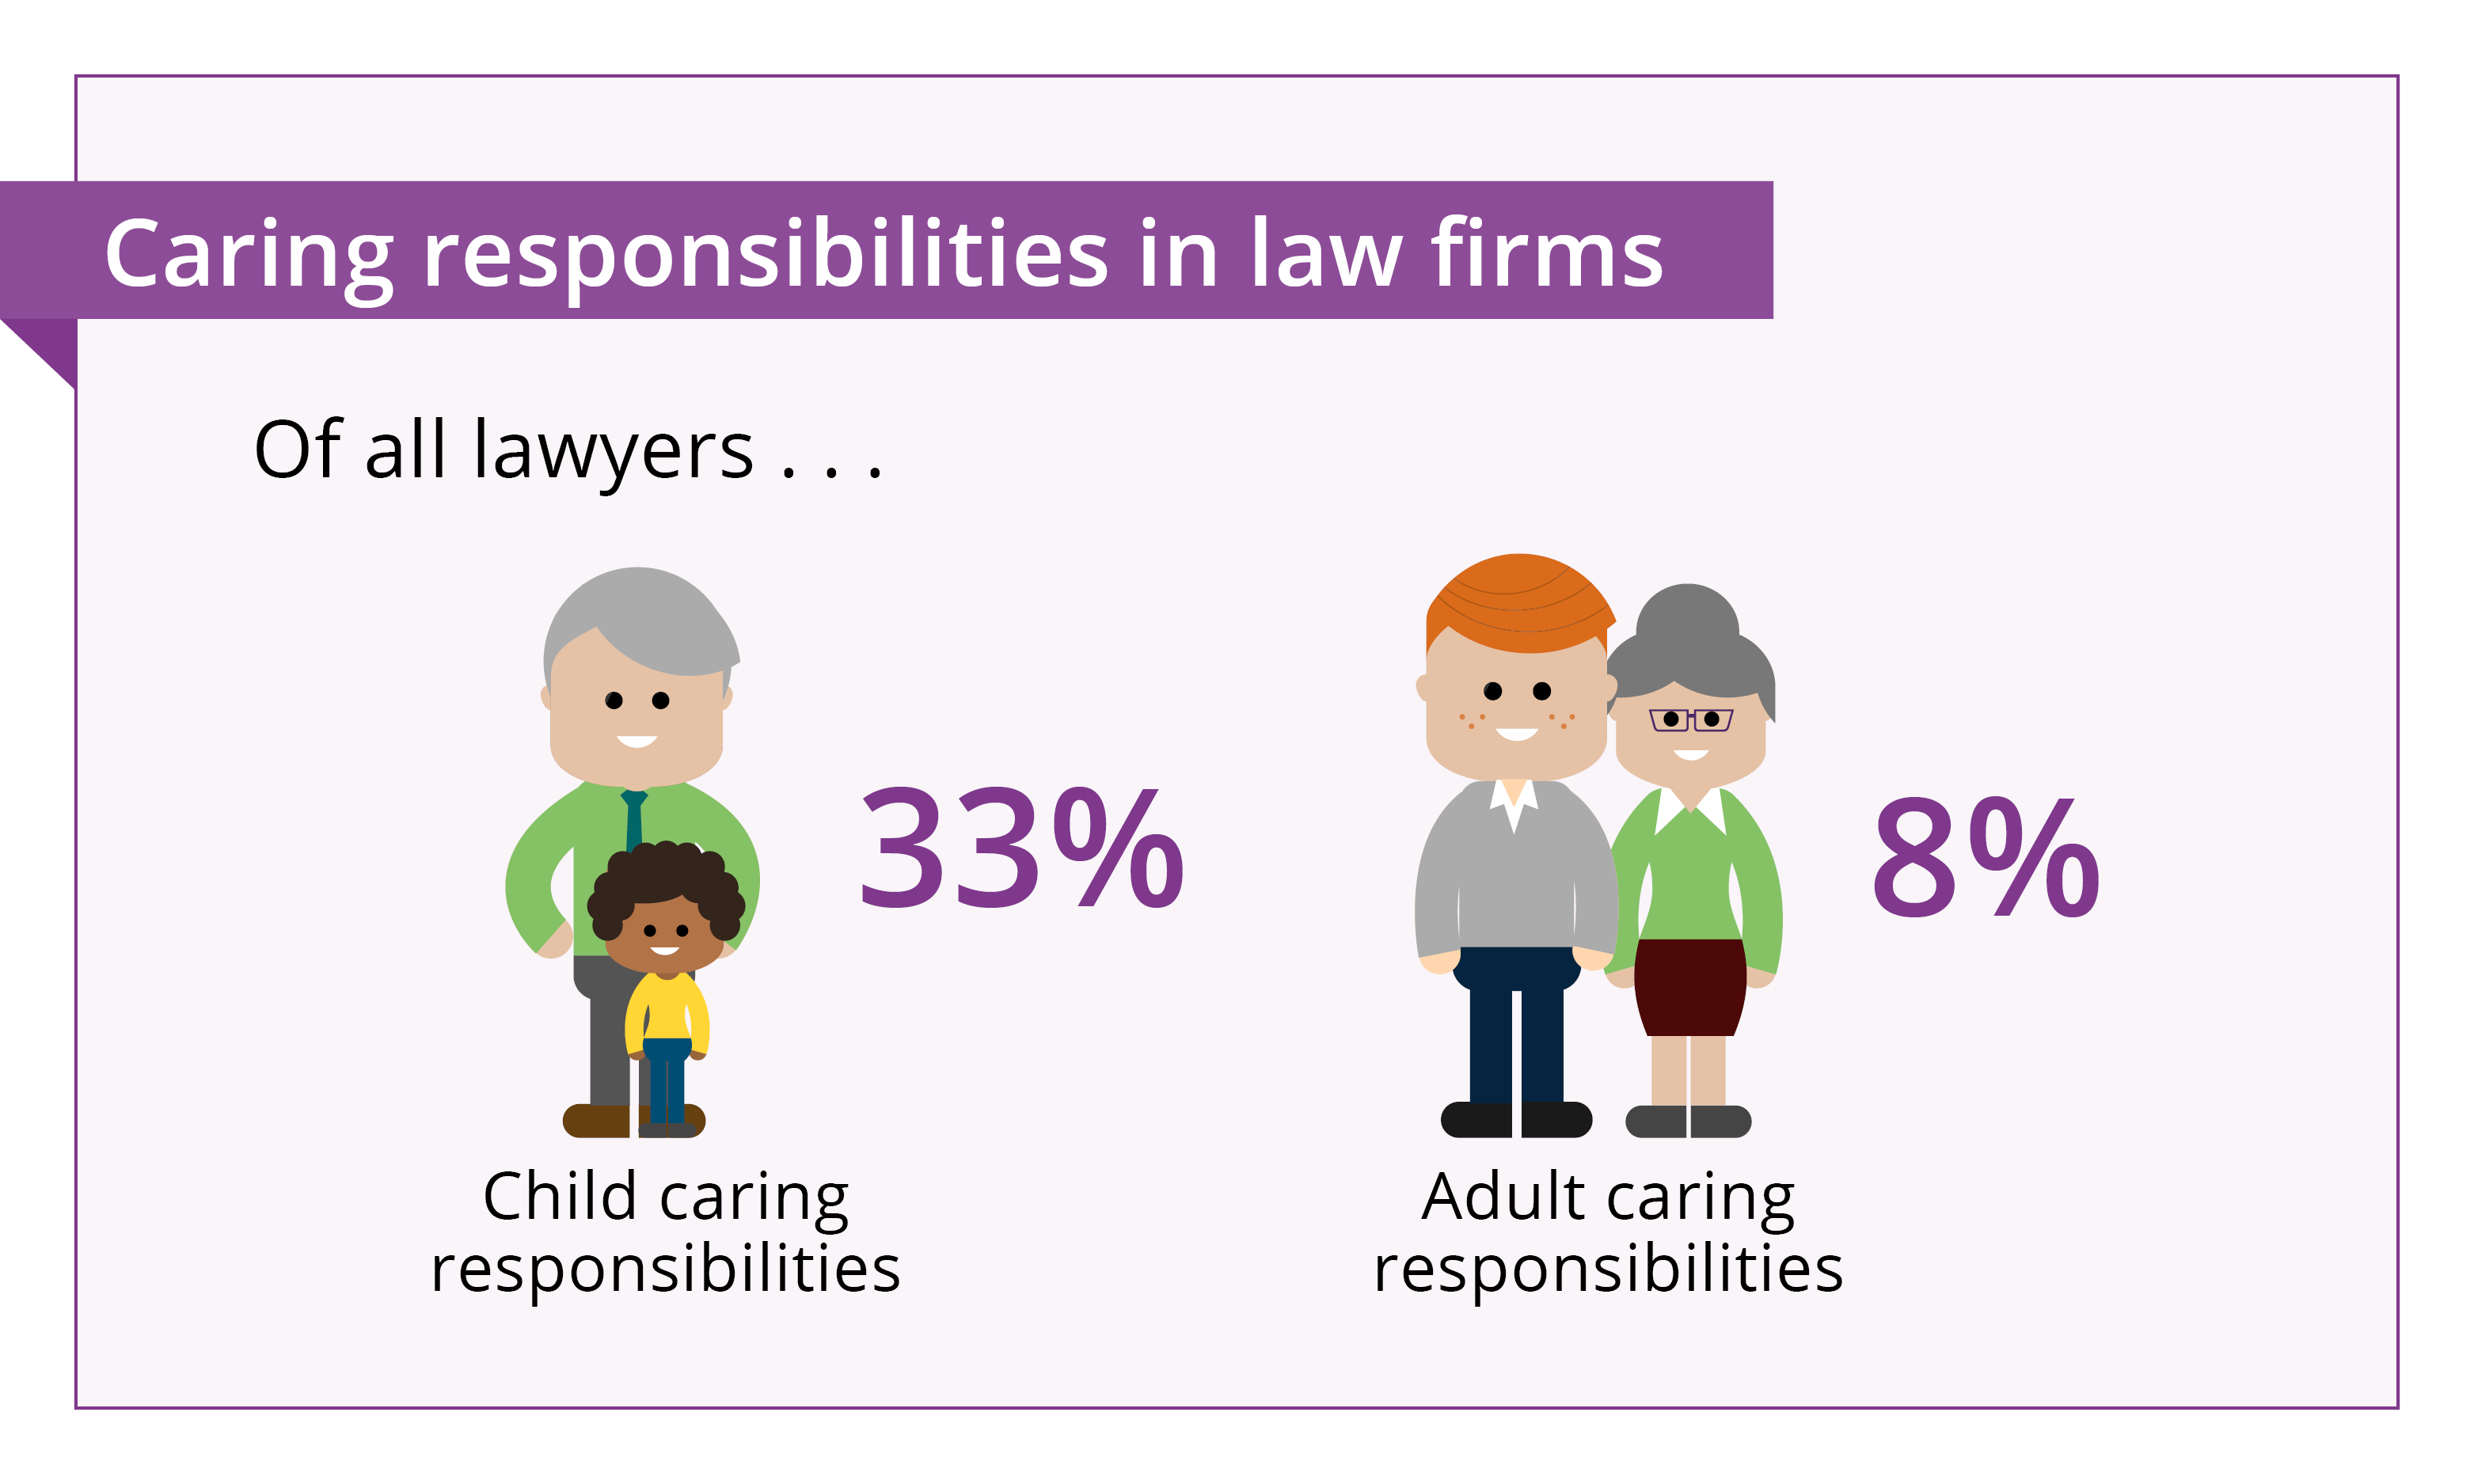 Of all lawyers 33% chilc caring responsibilities and 8% adult caring responsibilities